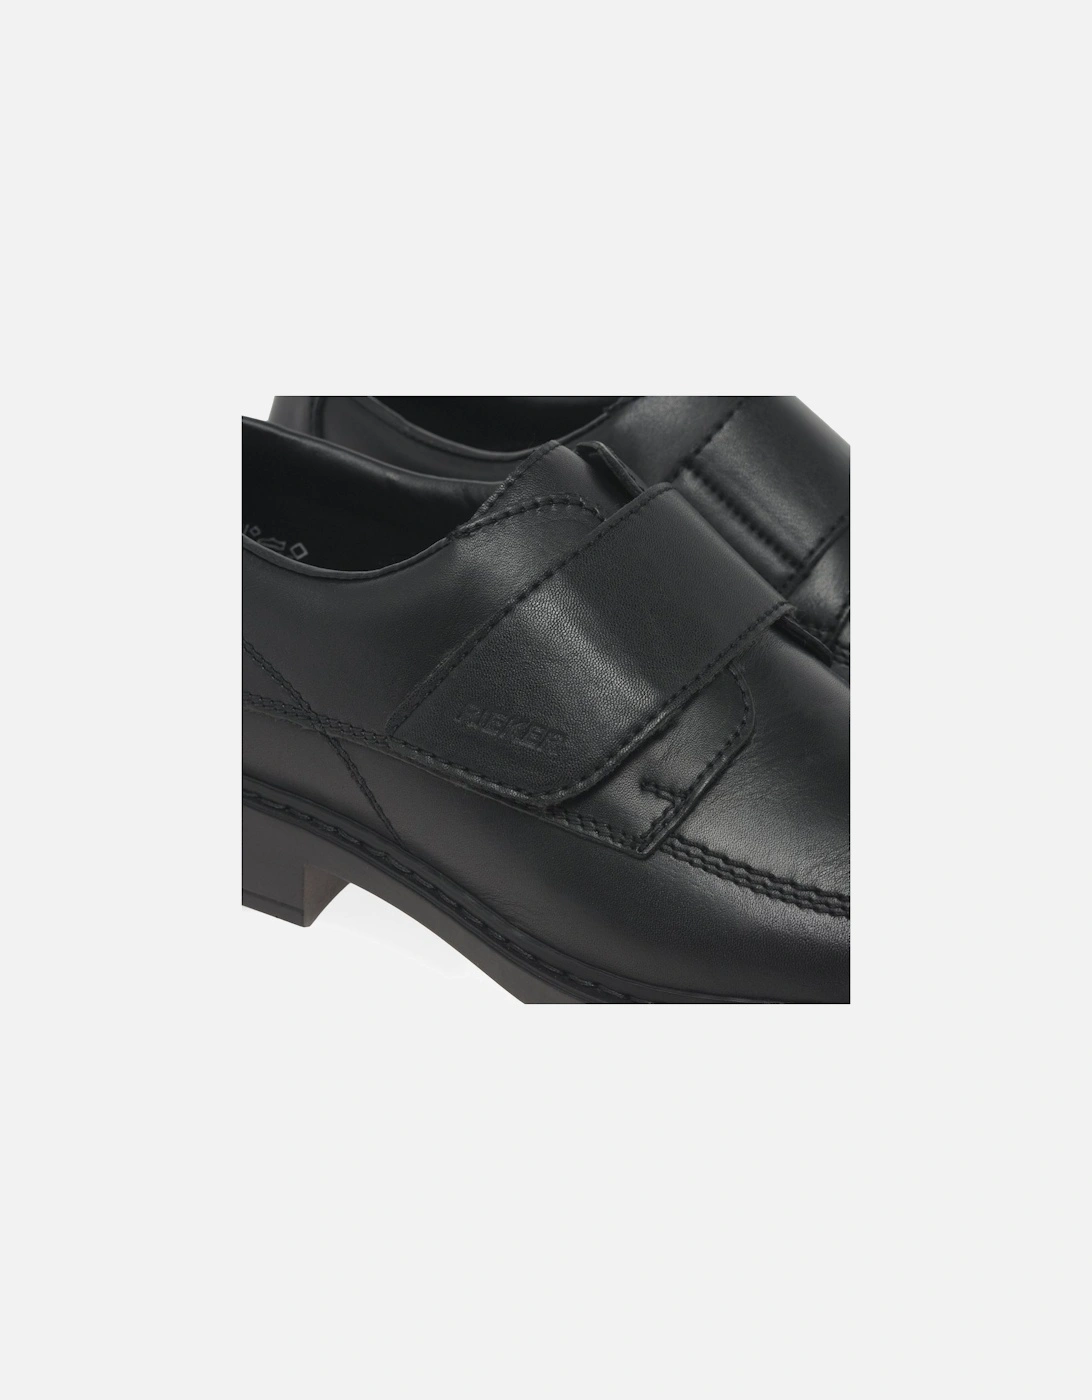 Buster Mens Formal Shoes